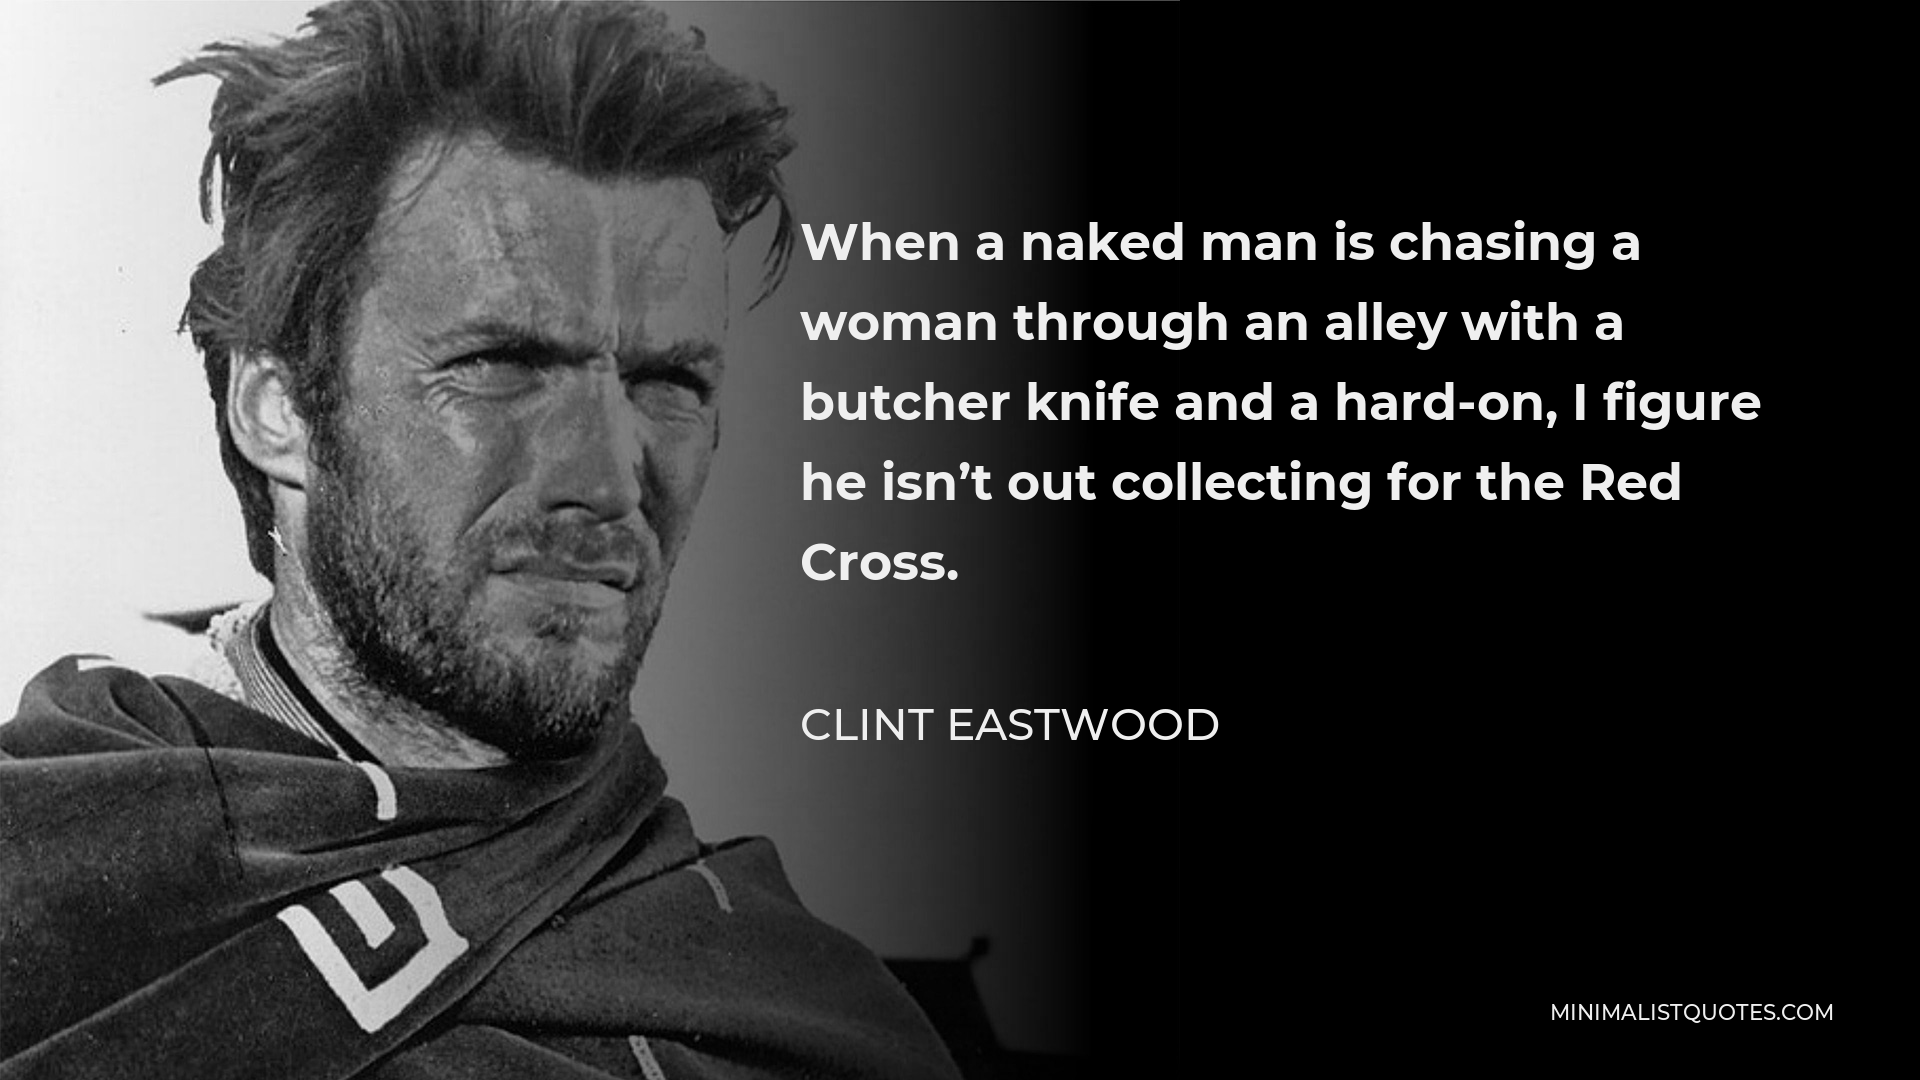 Clint Eastwood Quote - When a naked man is chasing a woman through an alley with a butcher knife and a hard-on, I figure he isn’t out collecting for the Red Cross.